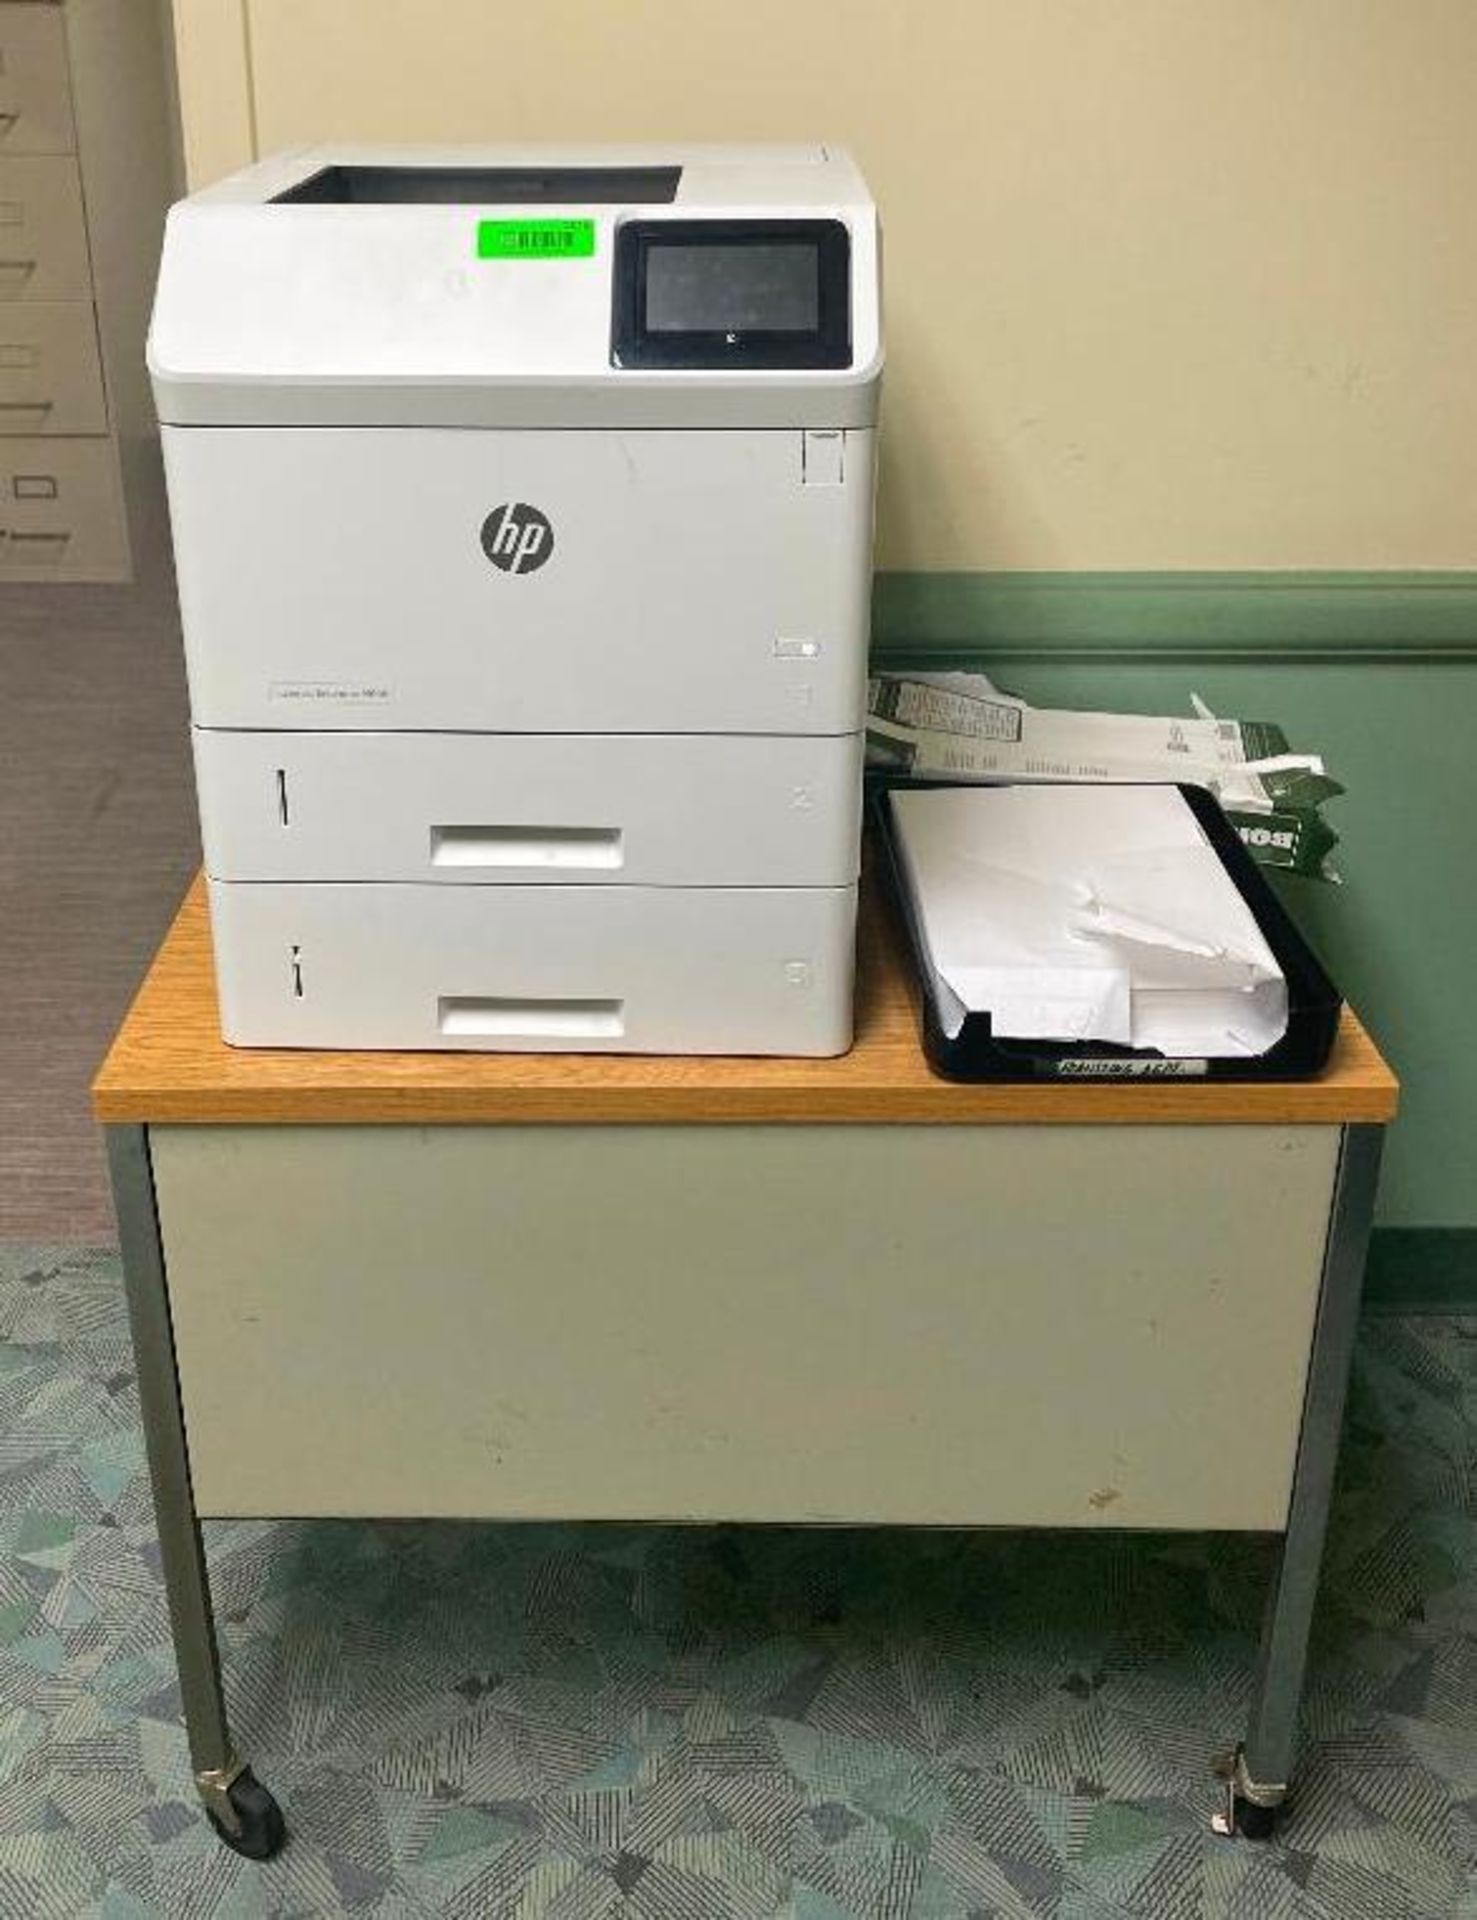 DESCRIPTION: HP LASER JET PRINTER WITH ROLLING CART AND PAPER THIS LOT IS: ONE MONEY QTY: 1